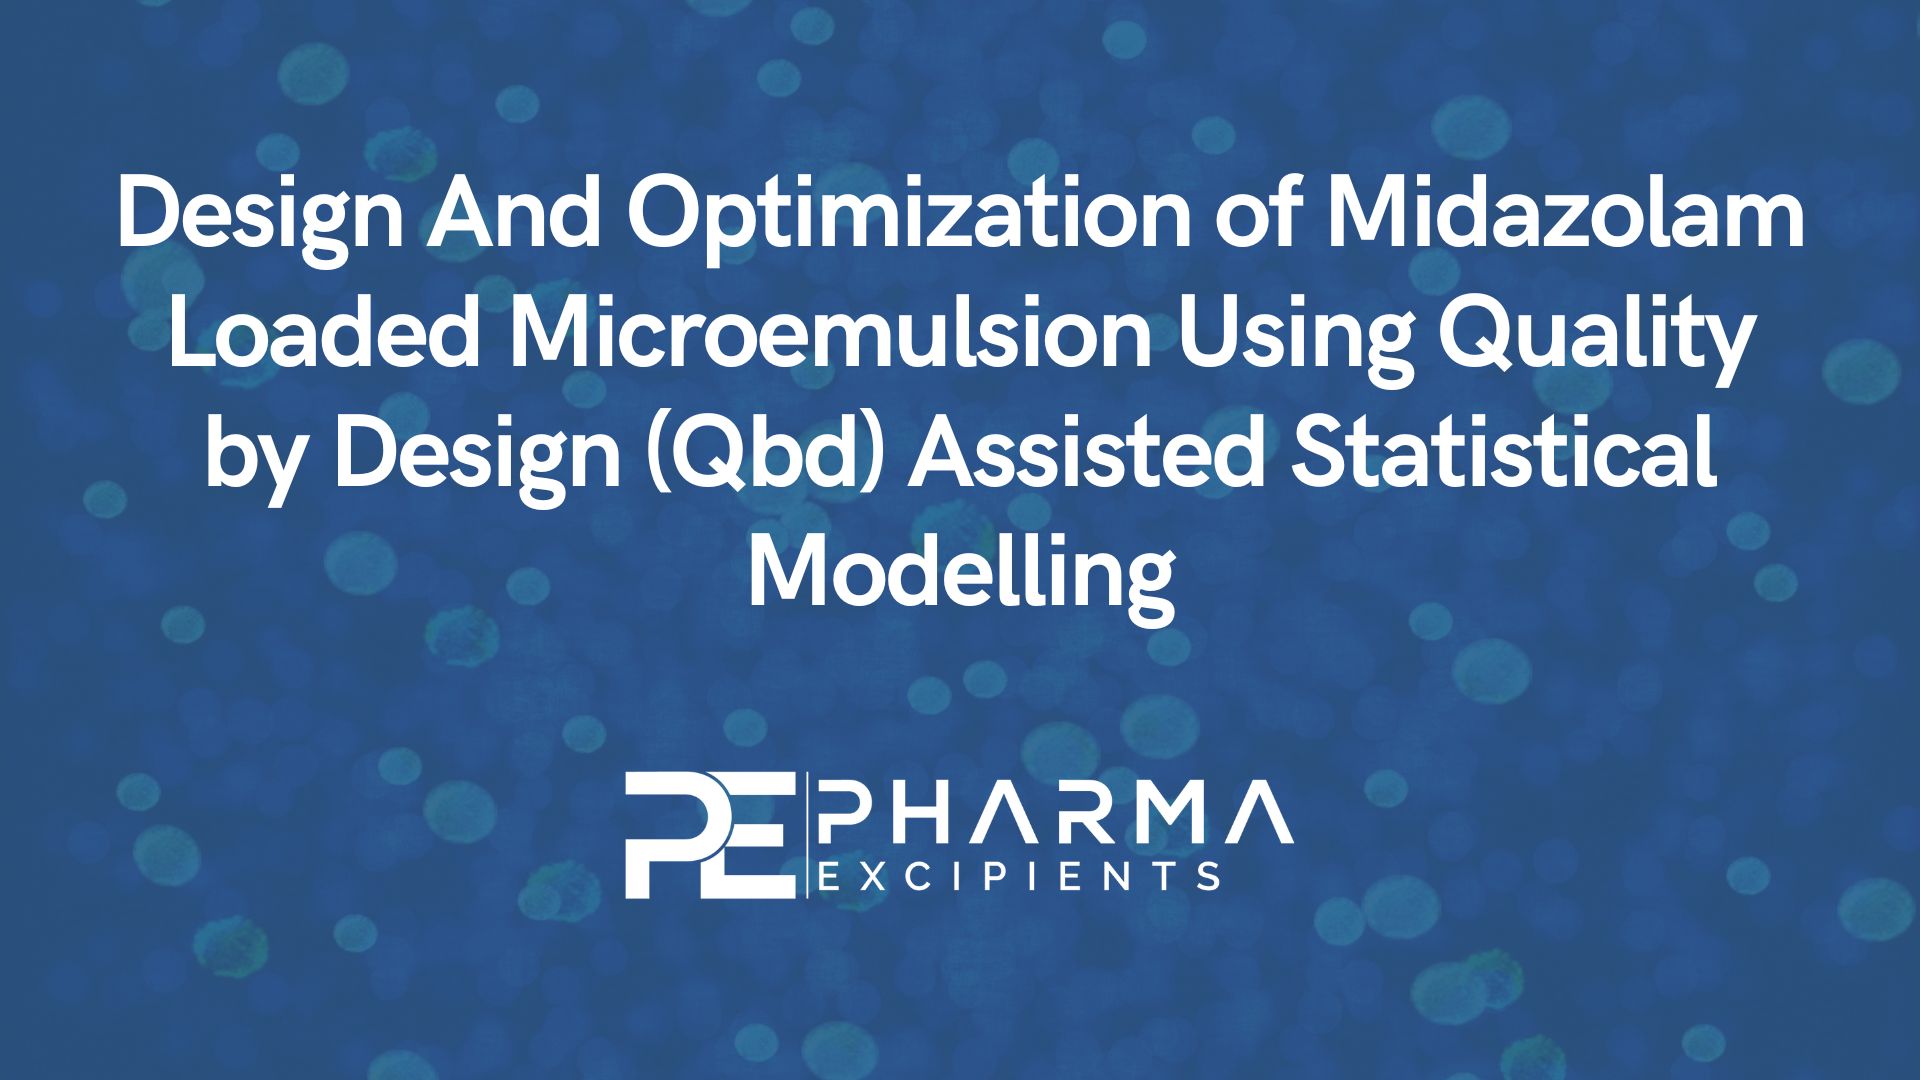 Design And Optimization of Midazolam Loaded Microemulsion Using Quality by Design (Qbd) Assisted Statistical Modelling